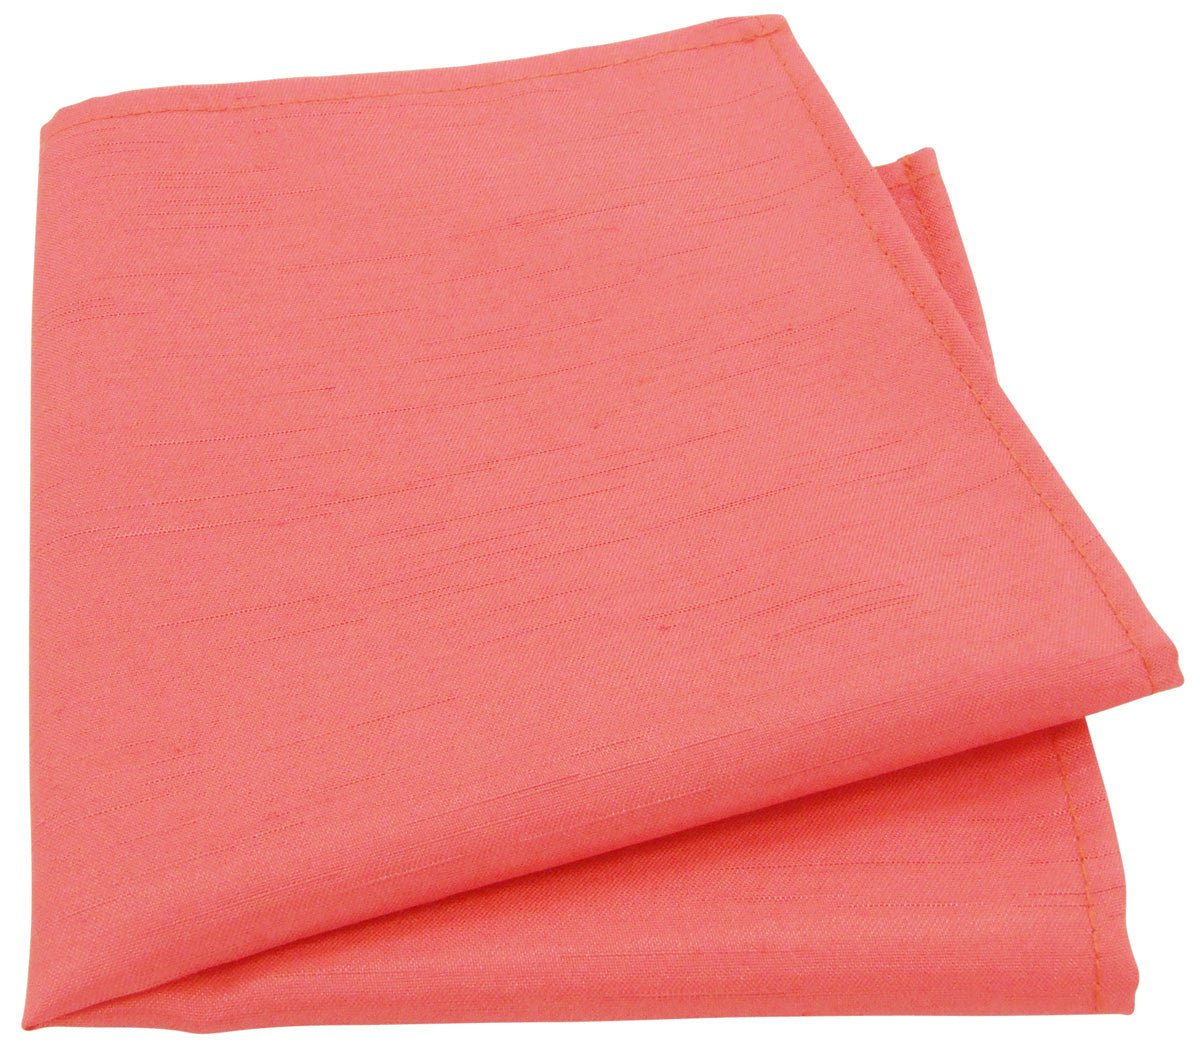 Coral Shantung Pocket Square - Wedding Pocket Square - - Swagger & Swoon